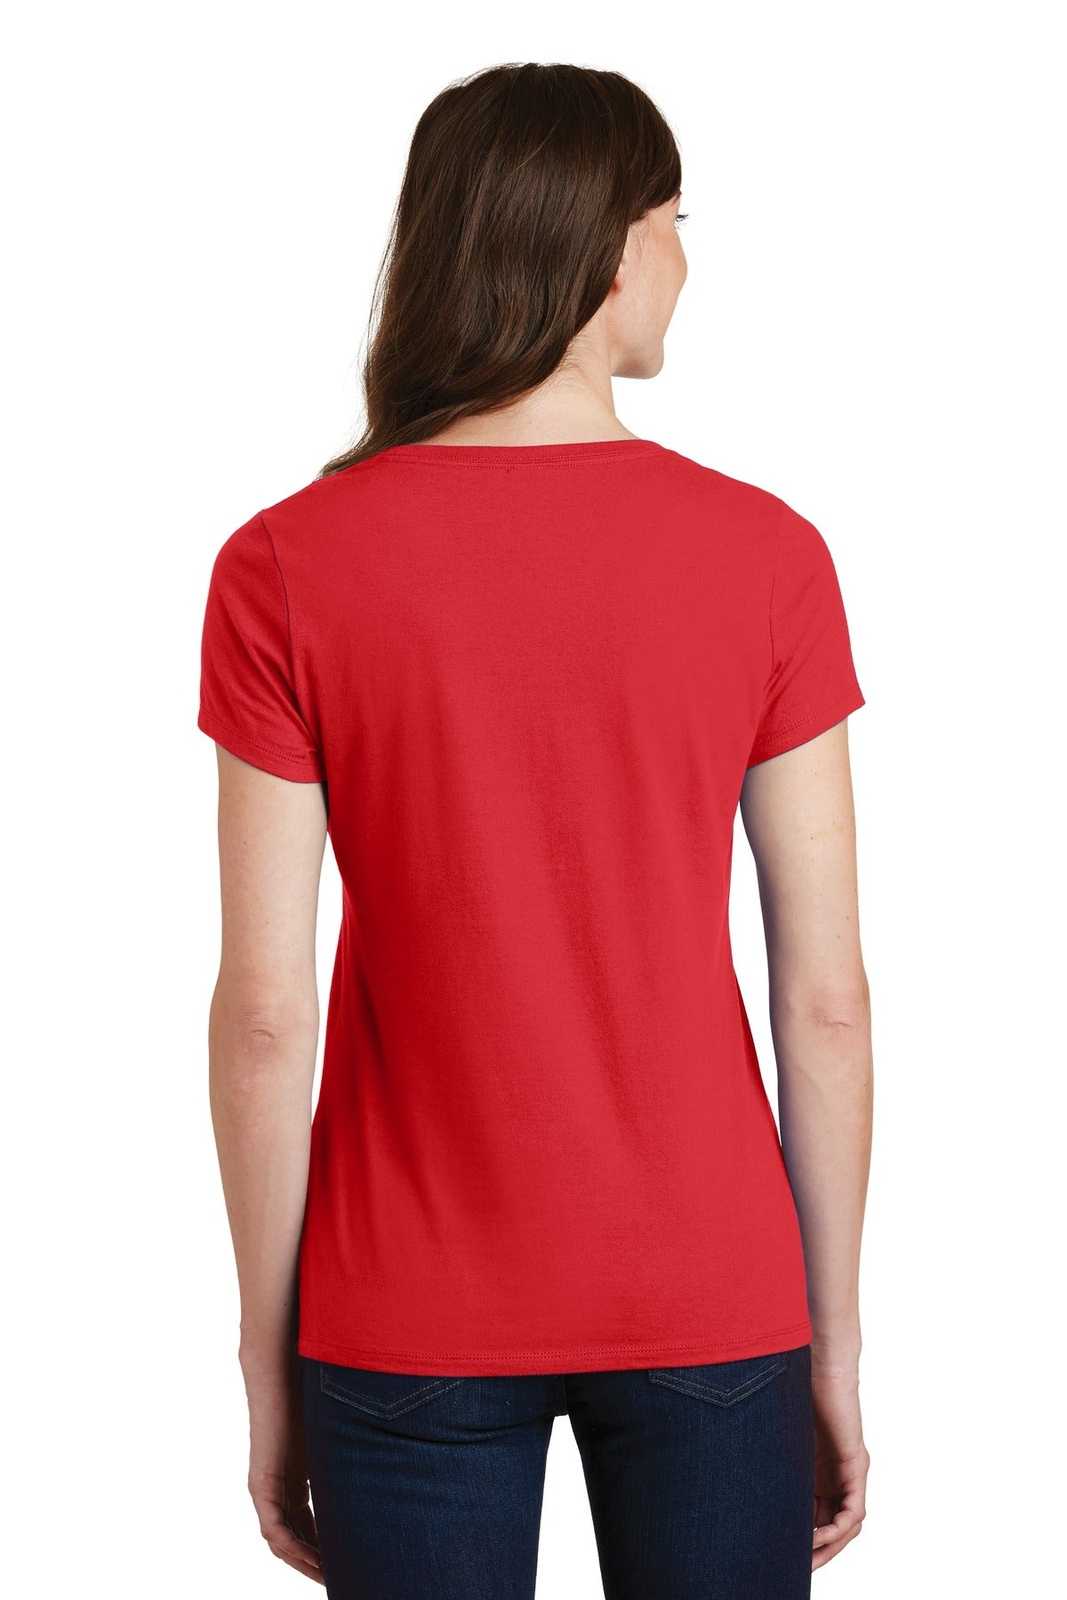 Port & Company LPC450V Ladies Fan Favorite V-Neck Tee - Bright Red - HIT a Double - 1